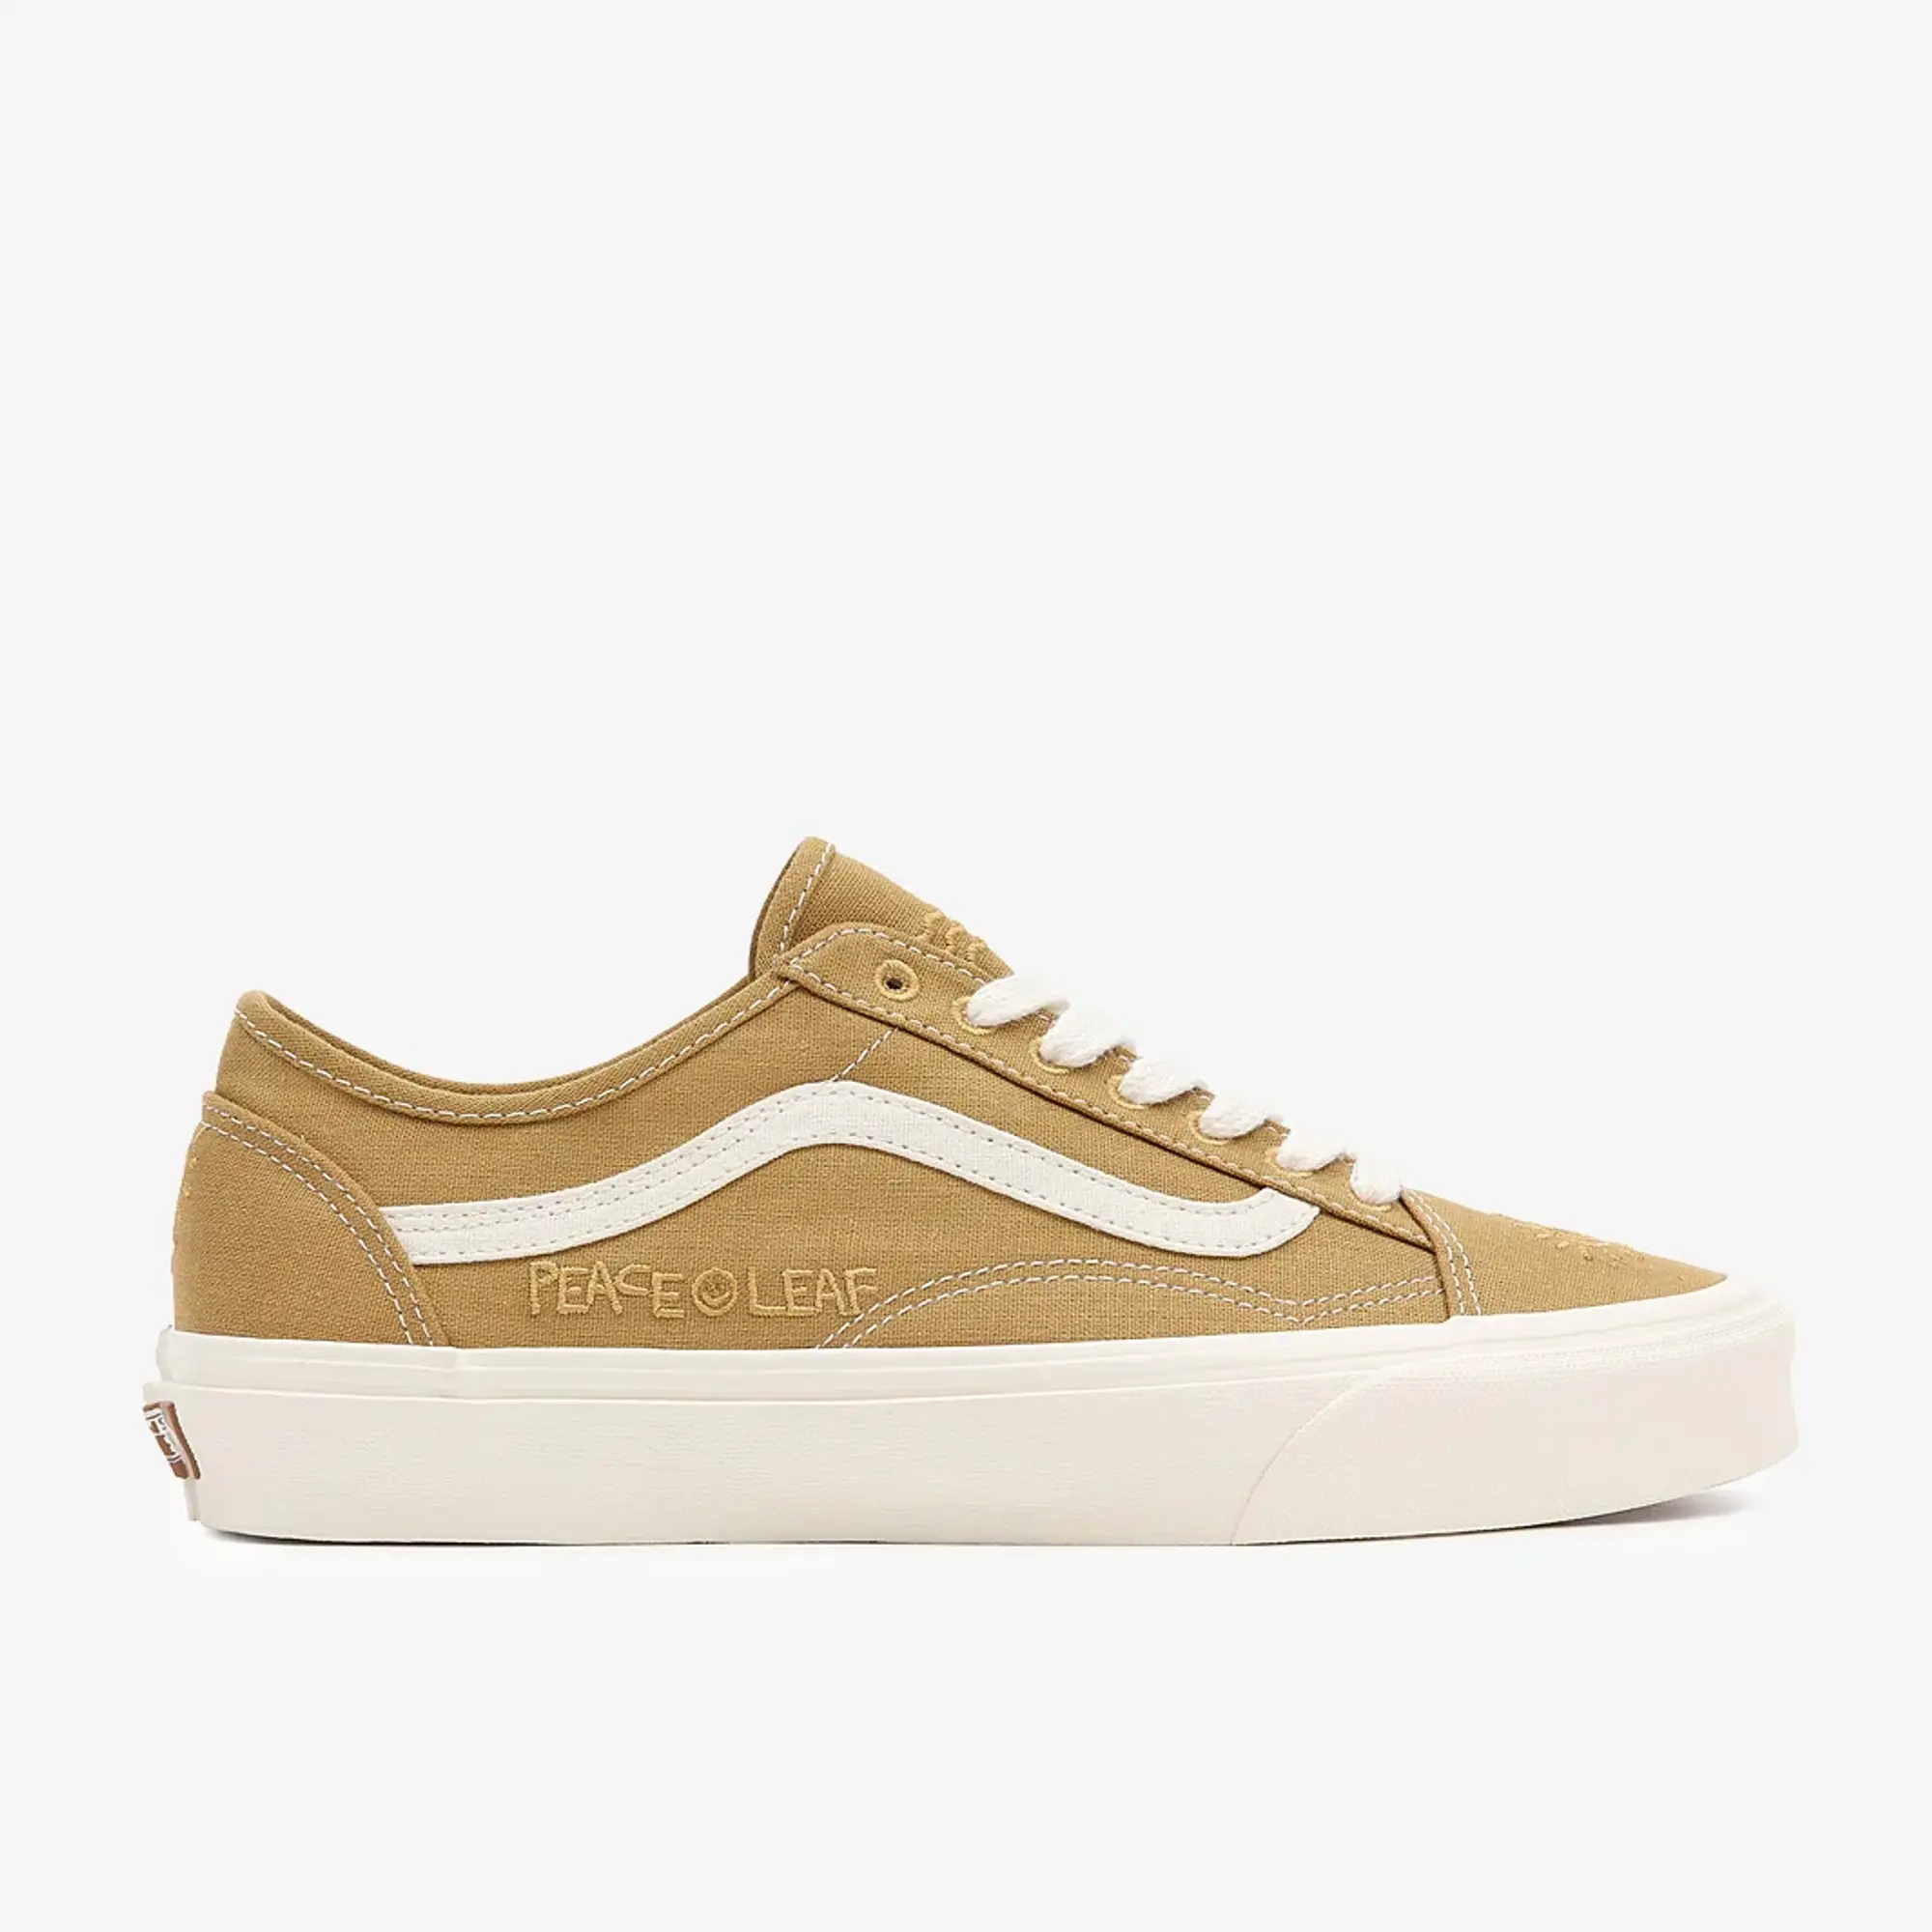 Vans Eco Theory Old Skool Tapered Shoes ((Eco Theory) Mustard Gold/True White) Men,Women Beige